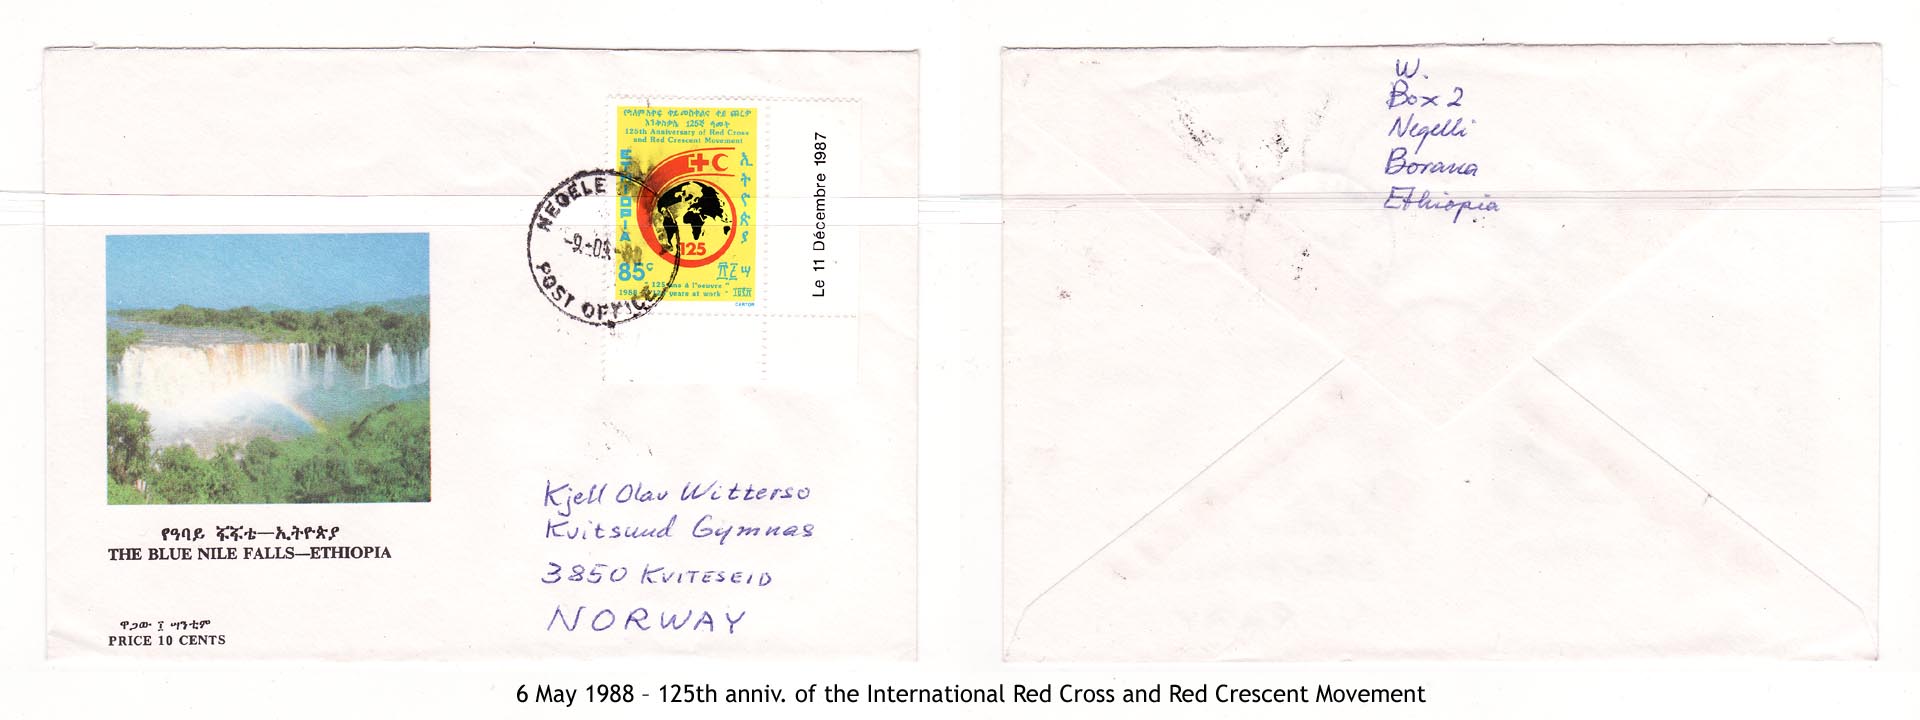 19880506 – 125th anniv. of the International Red Cross and Red Crescent Movement